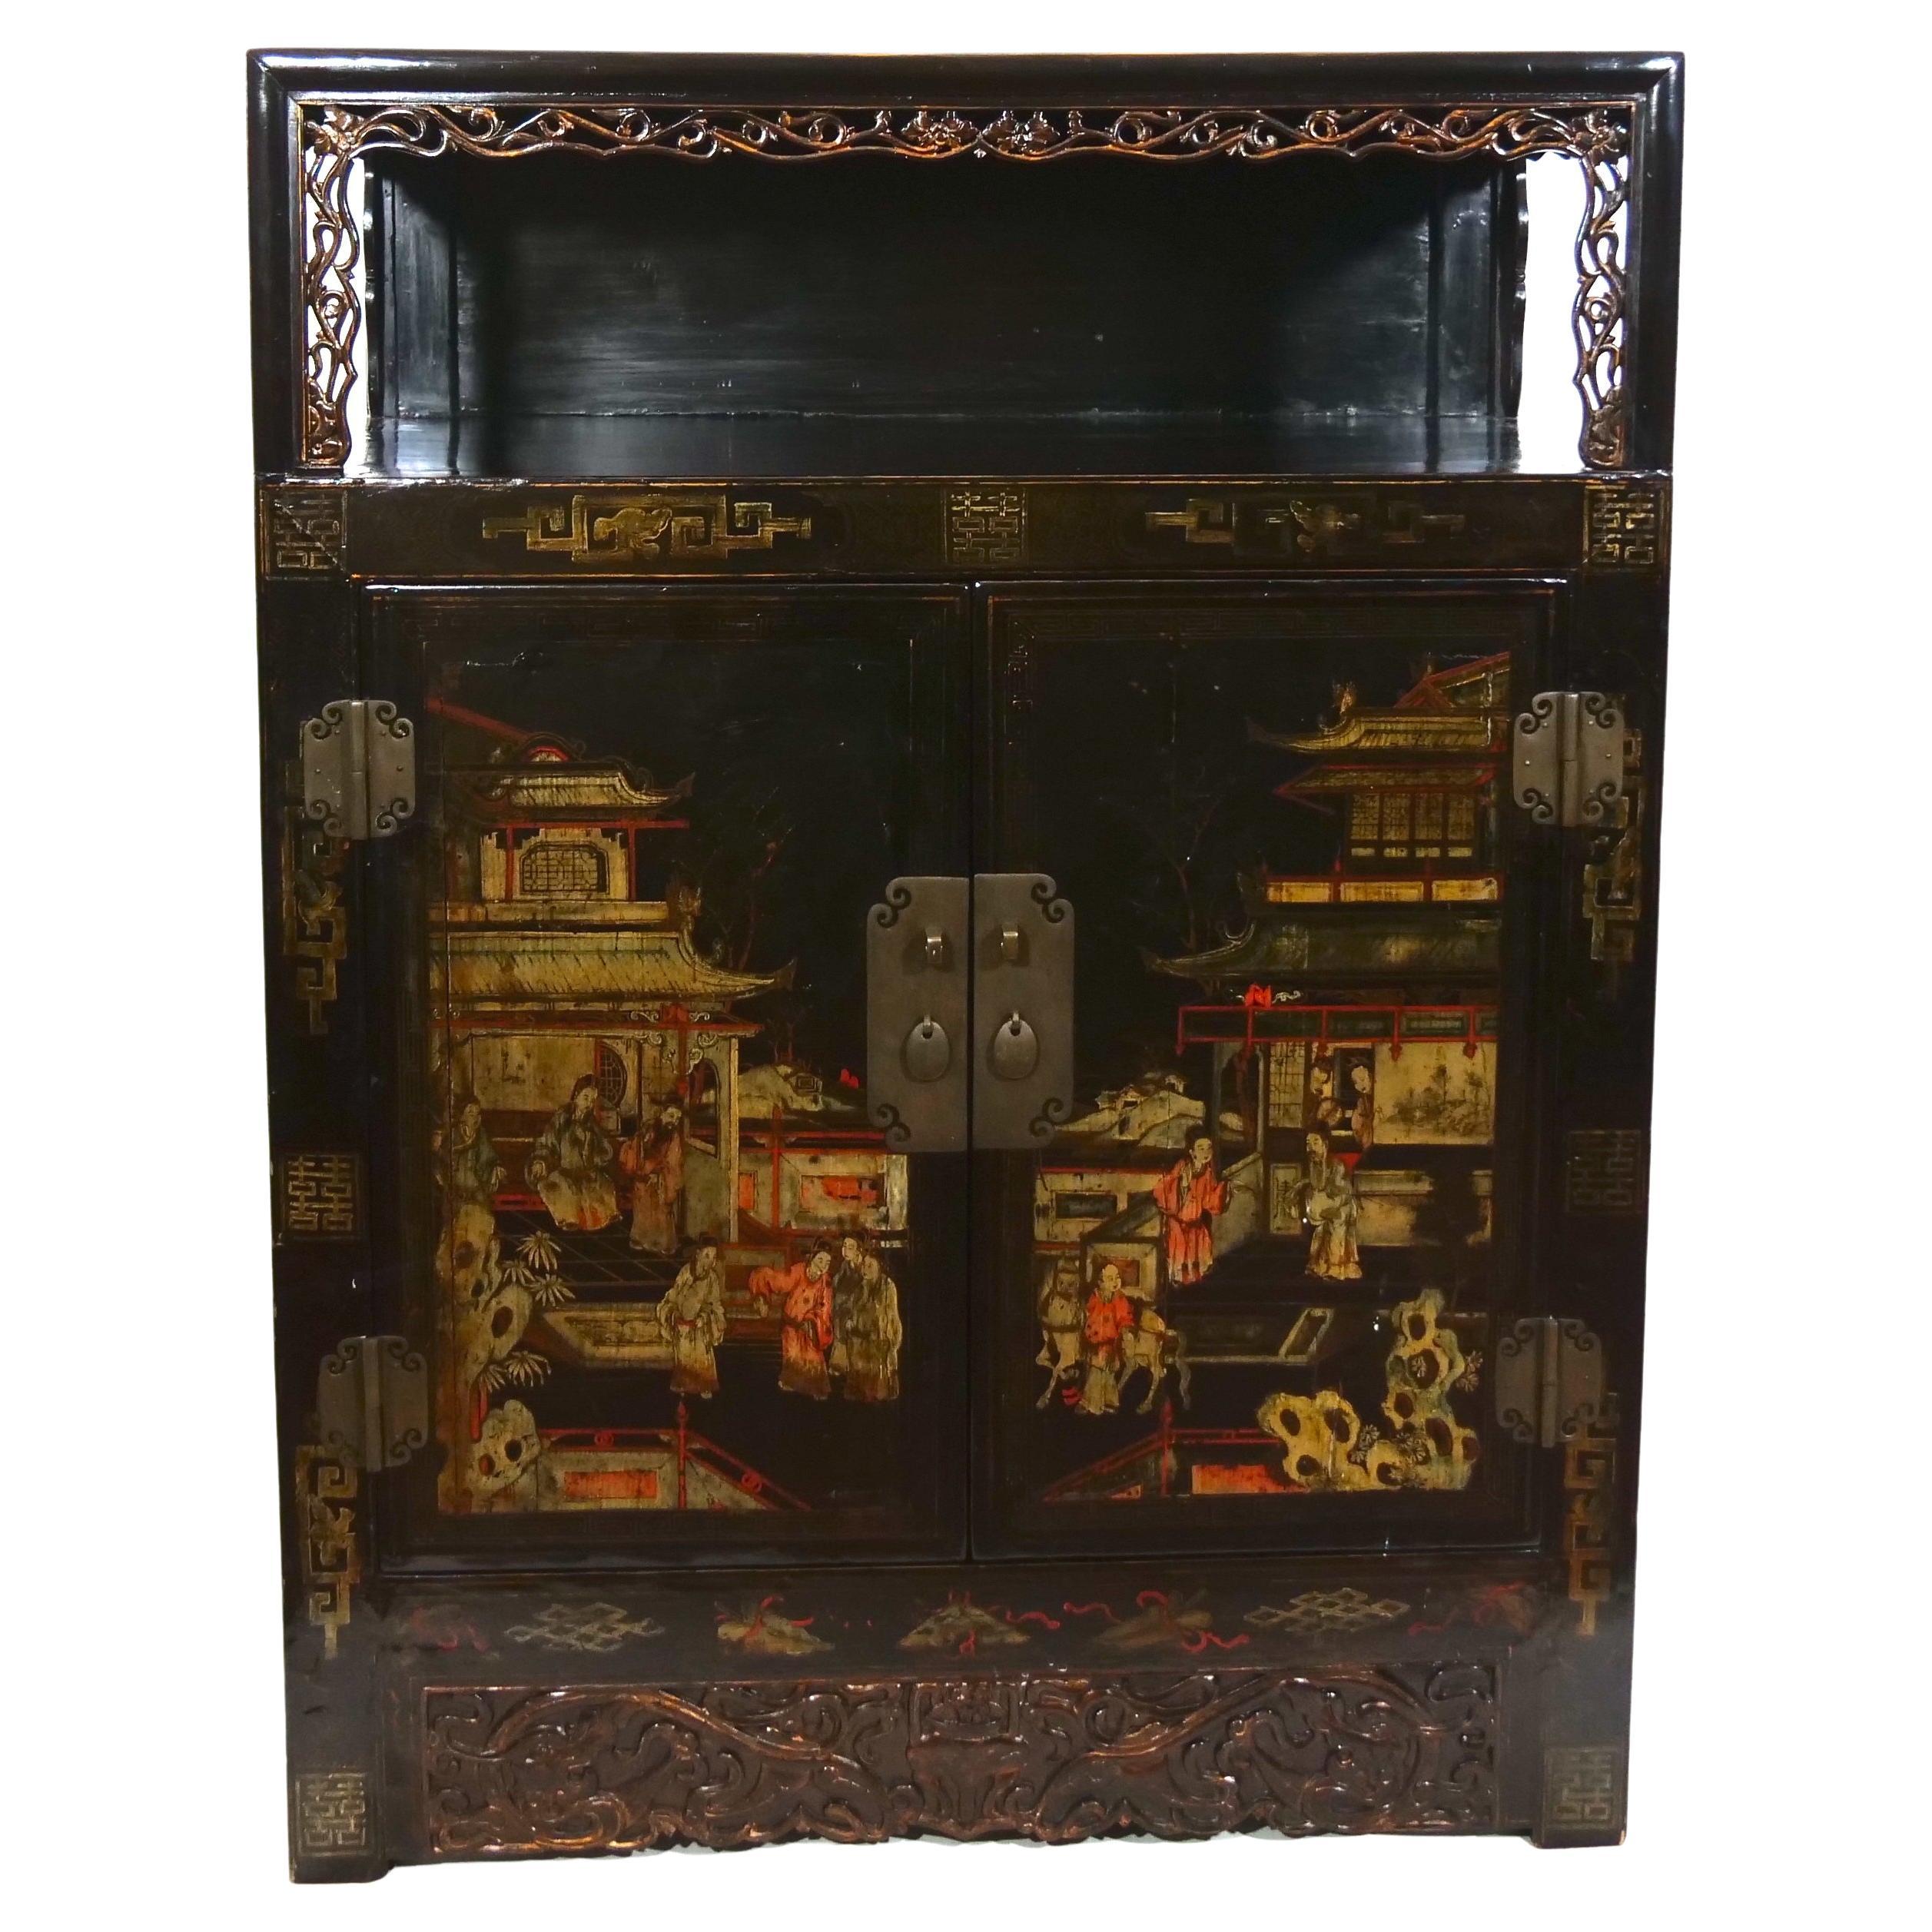 Early 20th century hand painted black lacquered wood two piece chinoiserie display cabinet. The cabinet features a removable trunk top with different hand painted chinoiserie scene, two front door and a hidden secret compartment resting on four